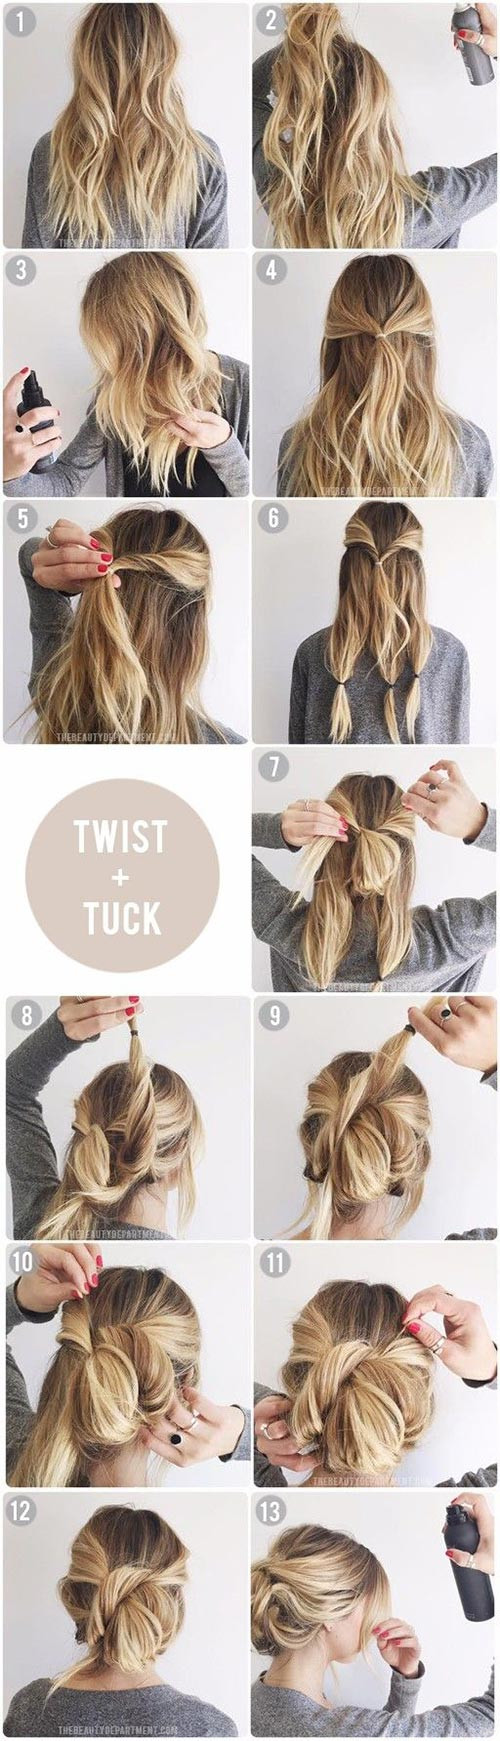 Updo Hairstyles Tutorial
 Top 10 Messy Updo Tutorials For Different Hair Lengths